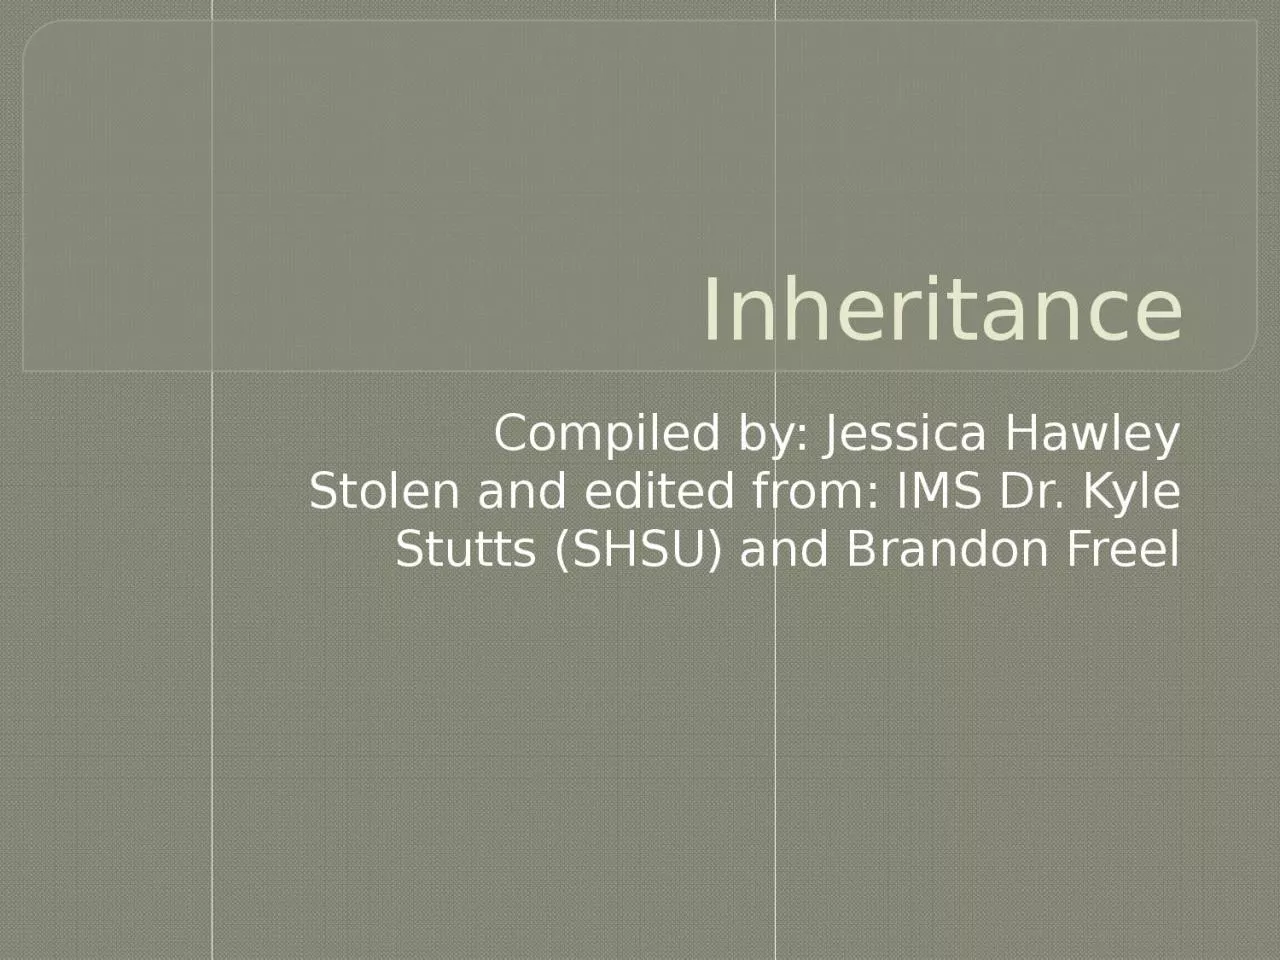 Inheritance Compiled by: Jessica Hawley